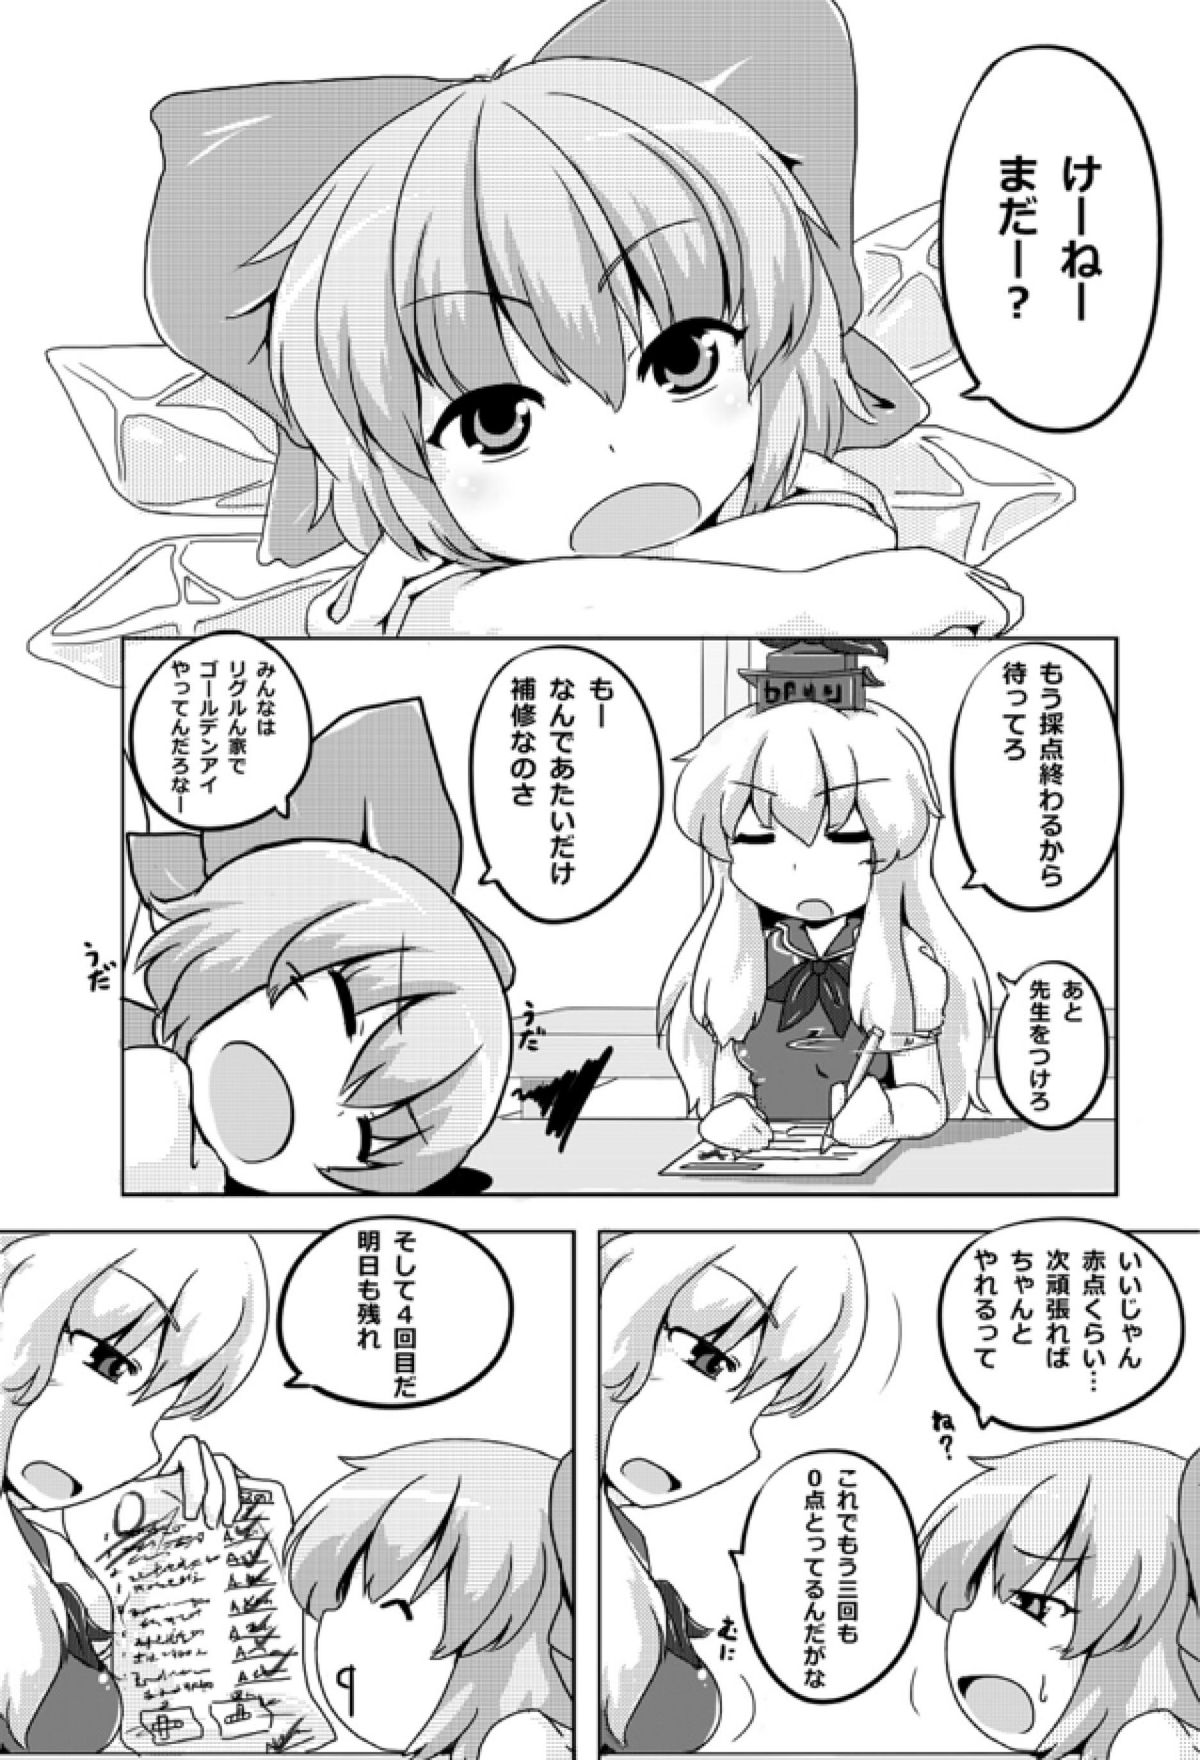 [GOLD LEAF (Sukedai)] Cirno Spoiler (Touhou Project) [Digital] page 3 full